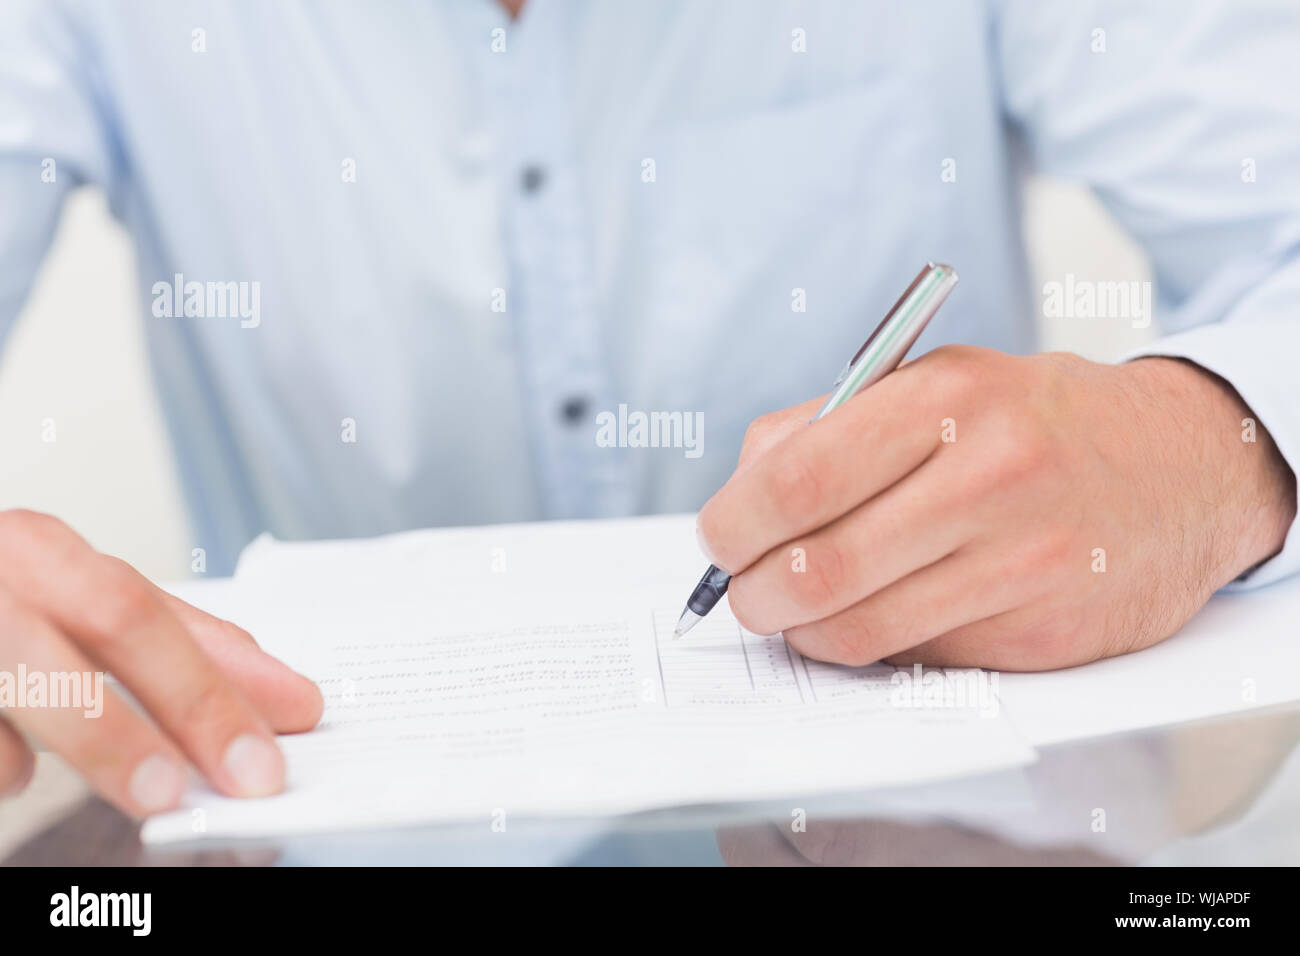 Mid section of a young man writing documents Stock Photo